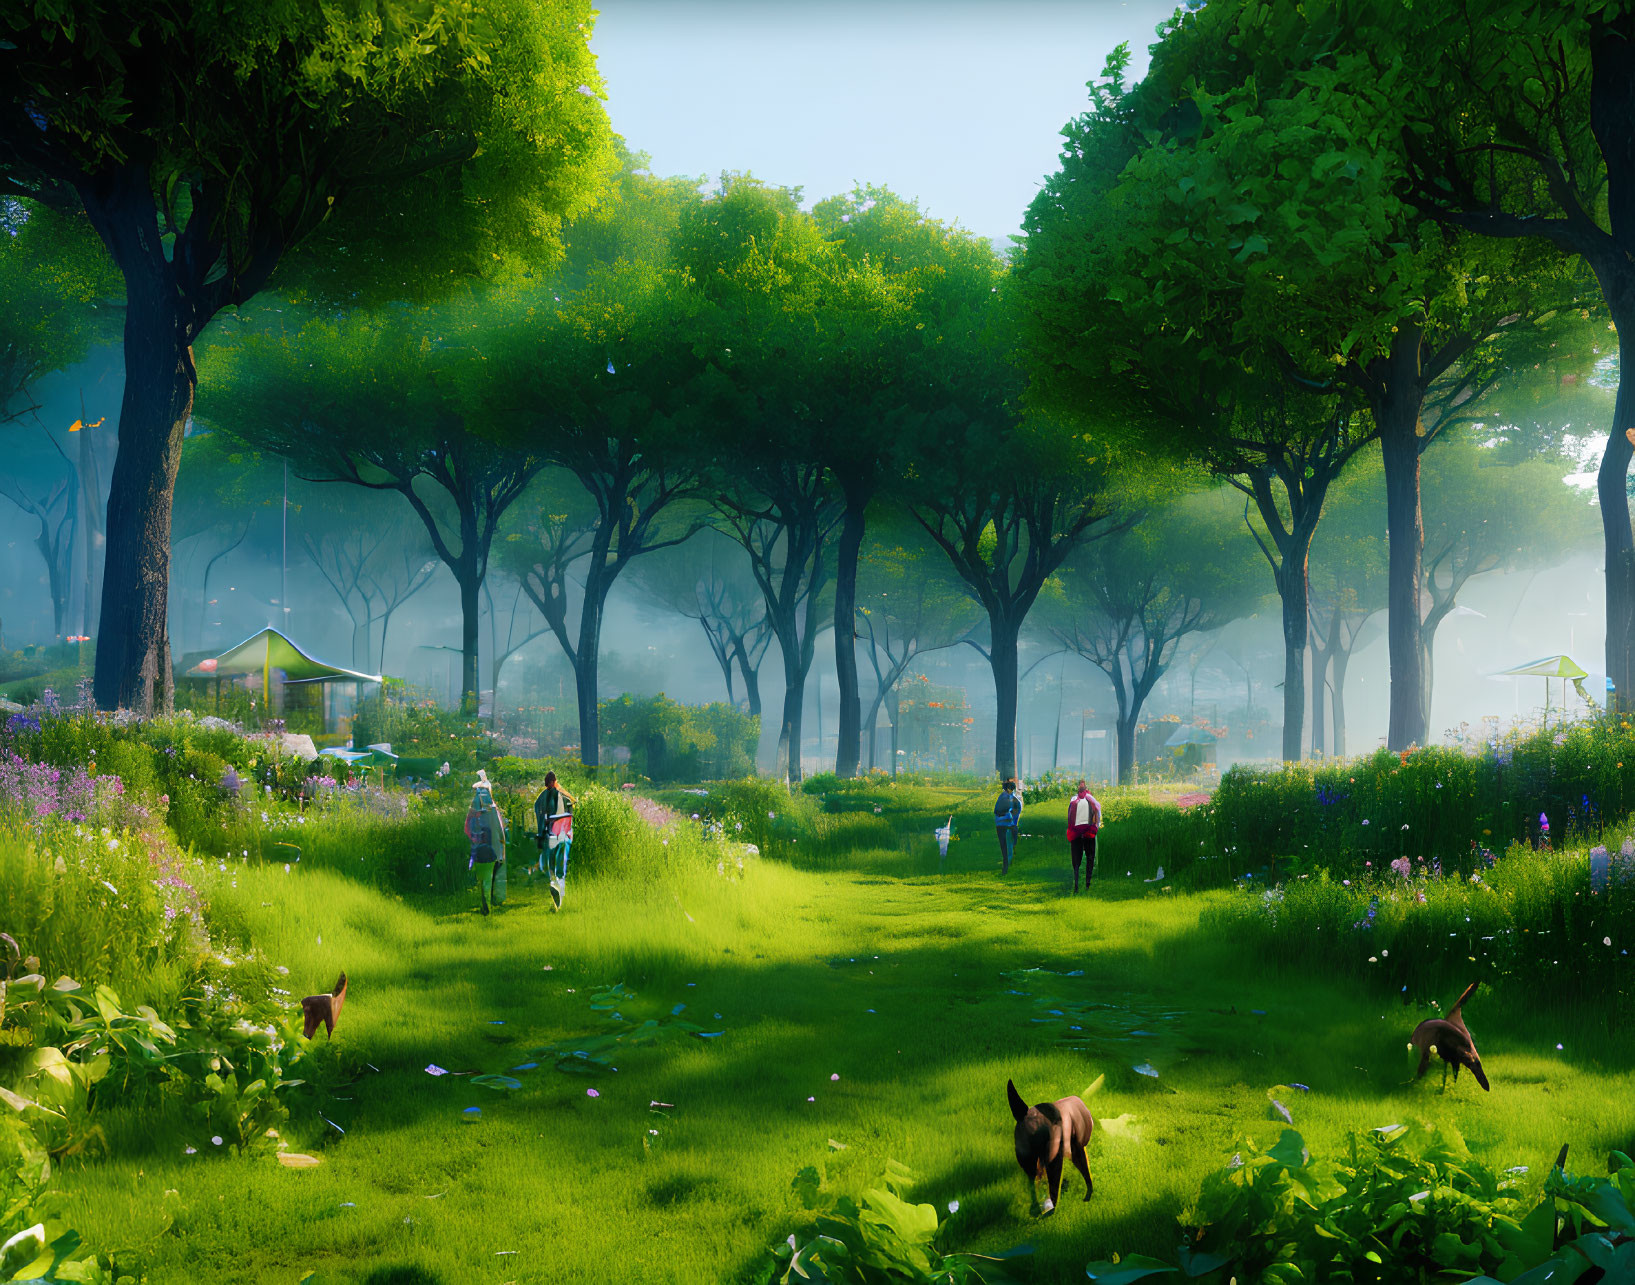 Tranquil Park Scene with Green Trees, People, Flowers, and Dogs